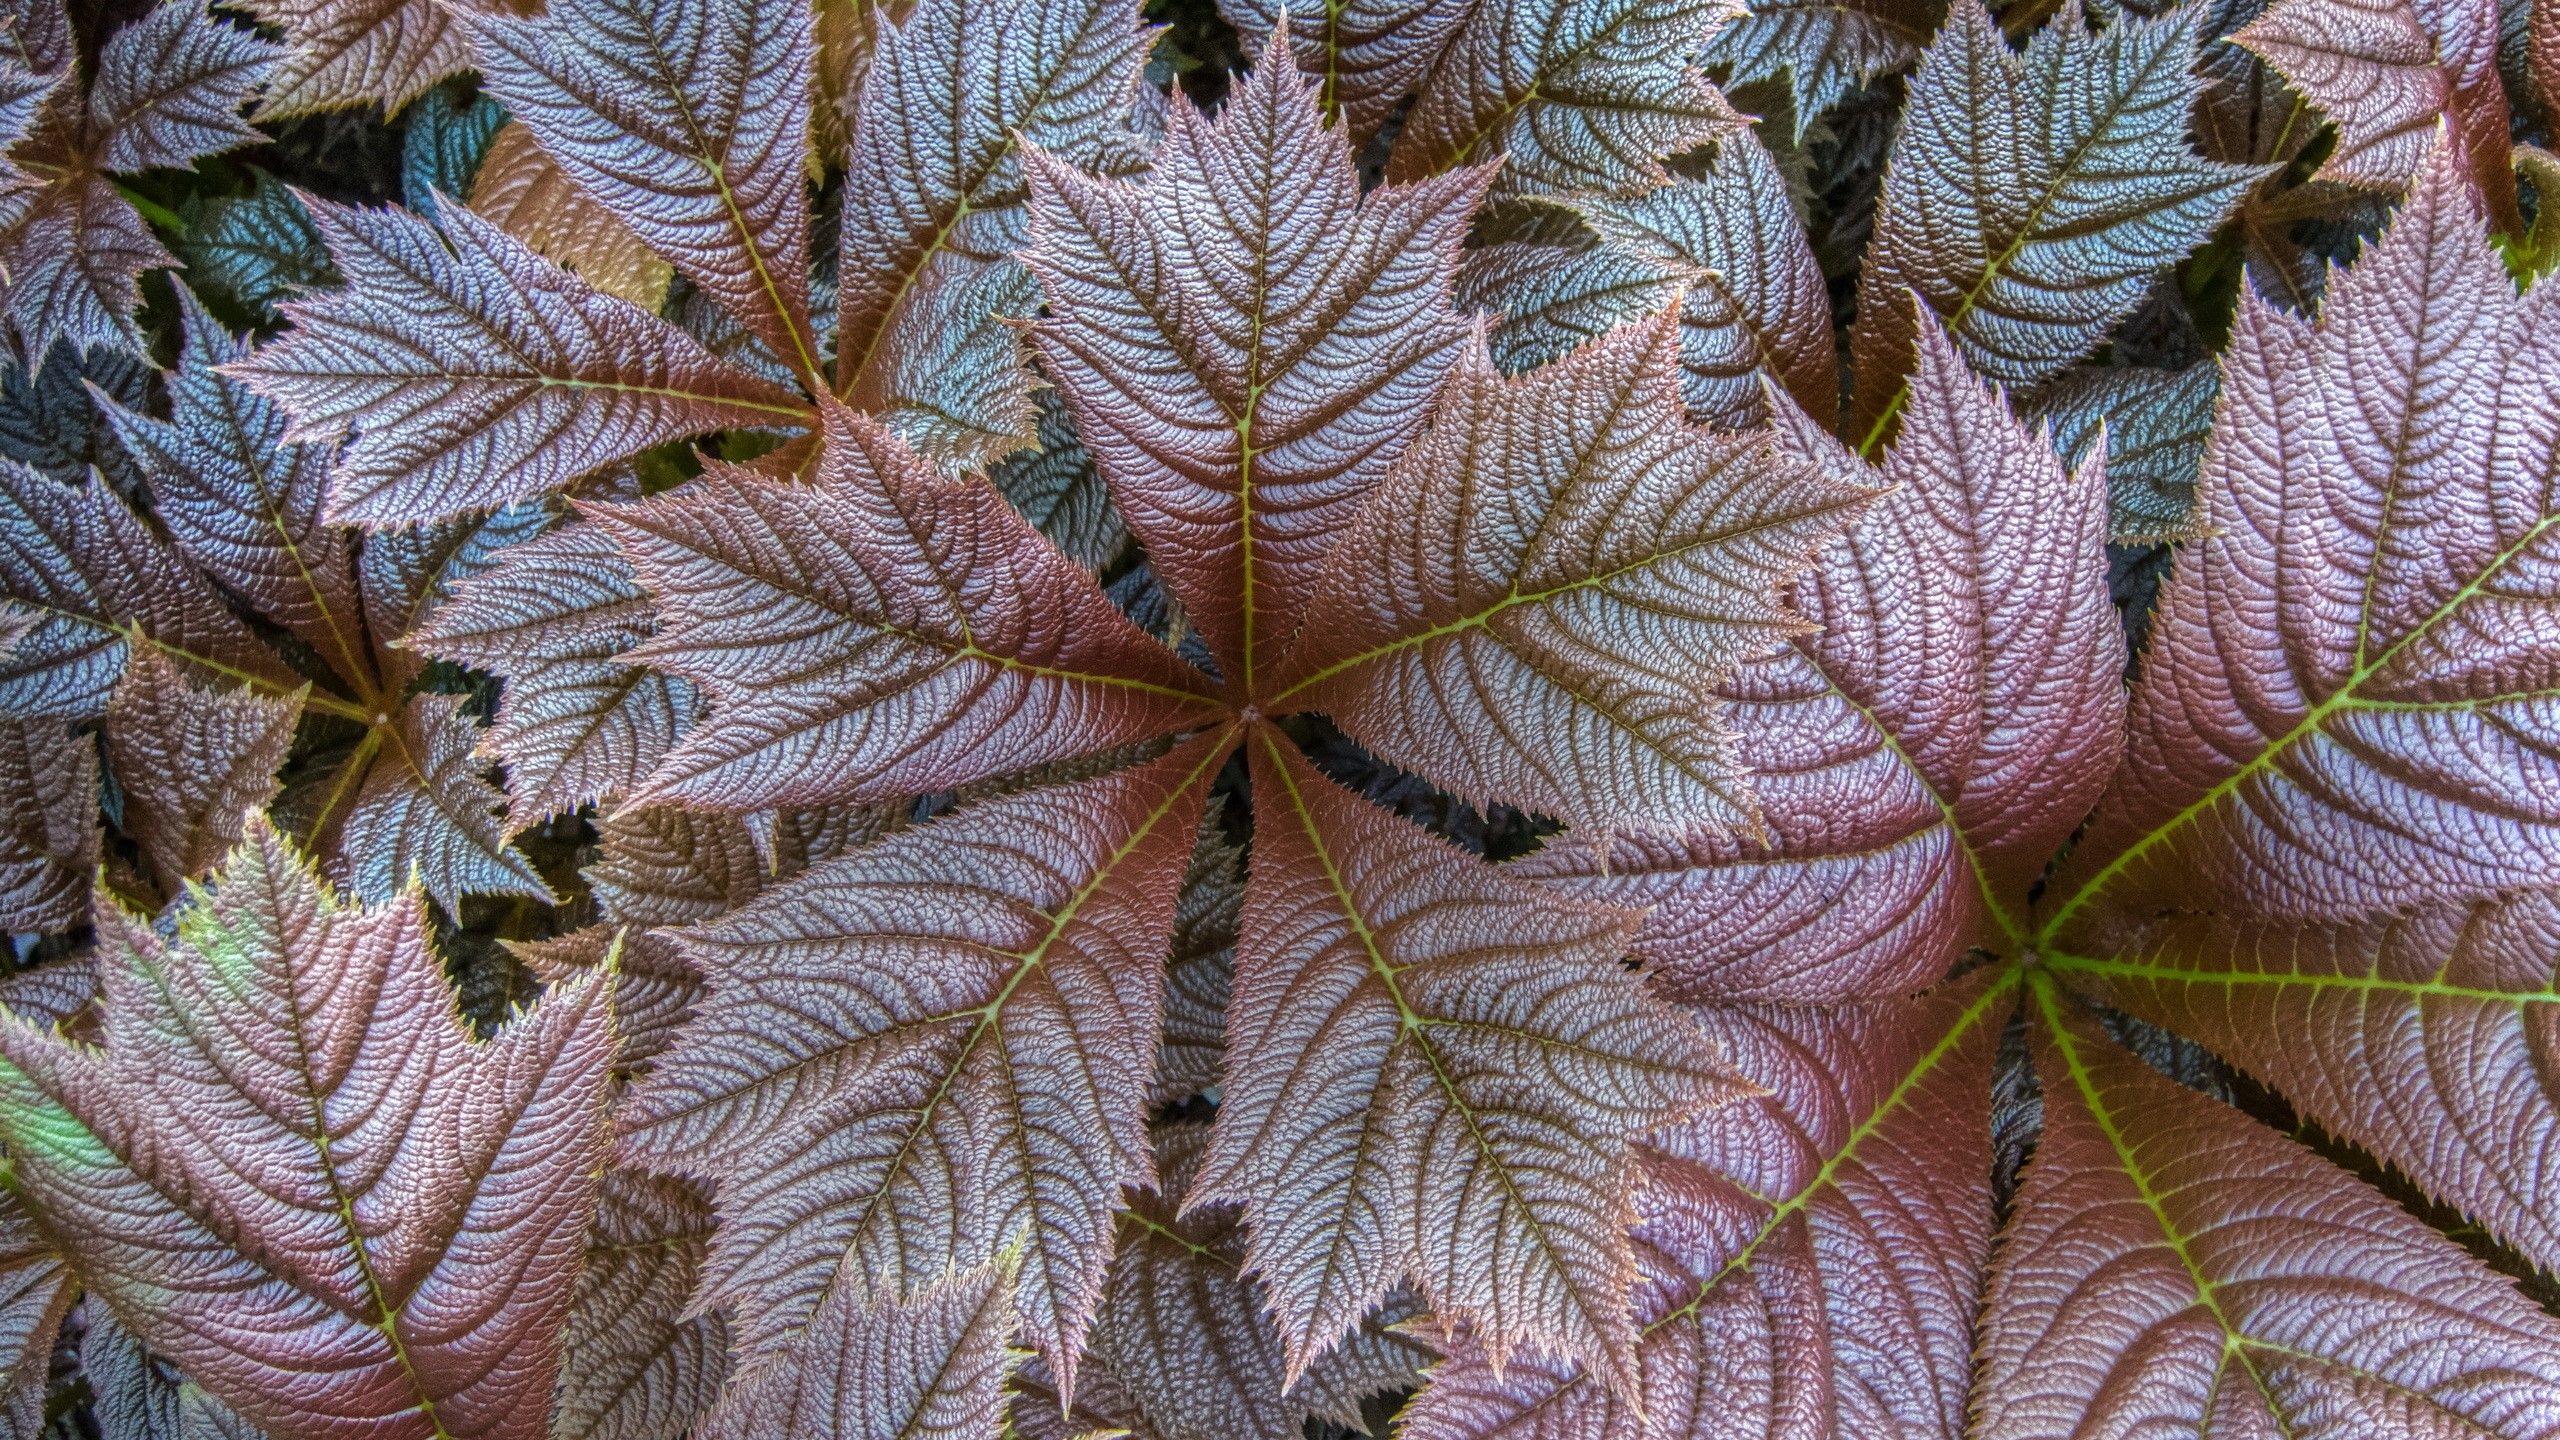 General 2560x1440 nature closeup fall leaves texture plants